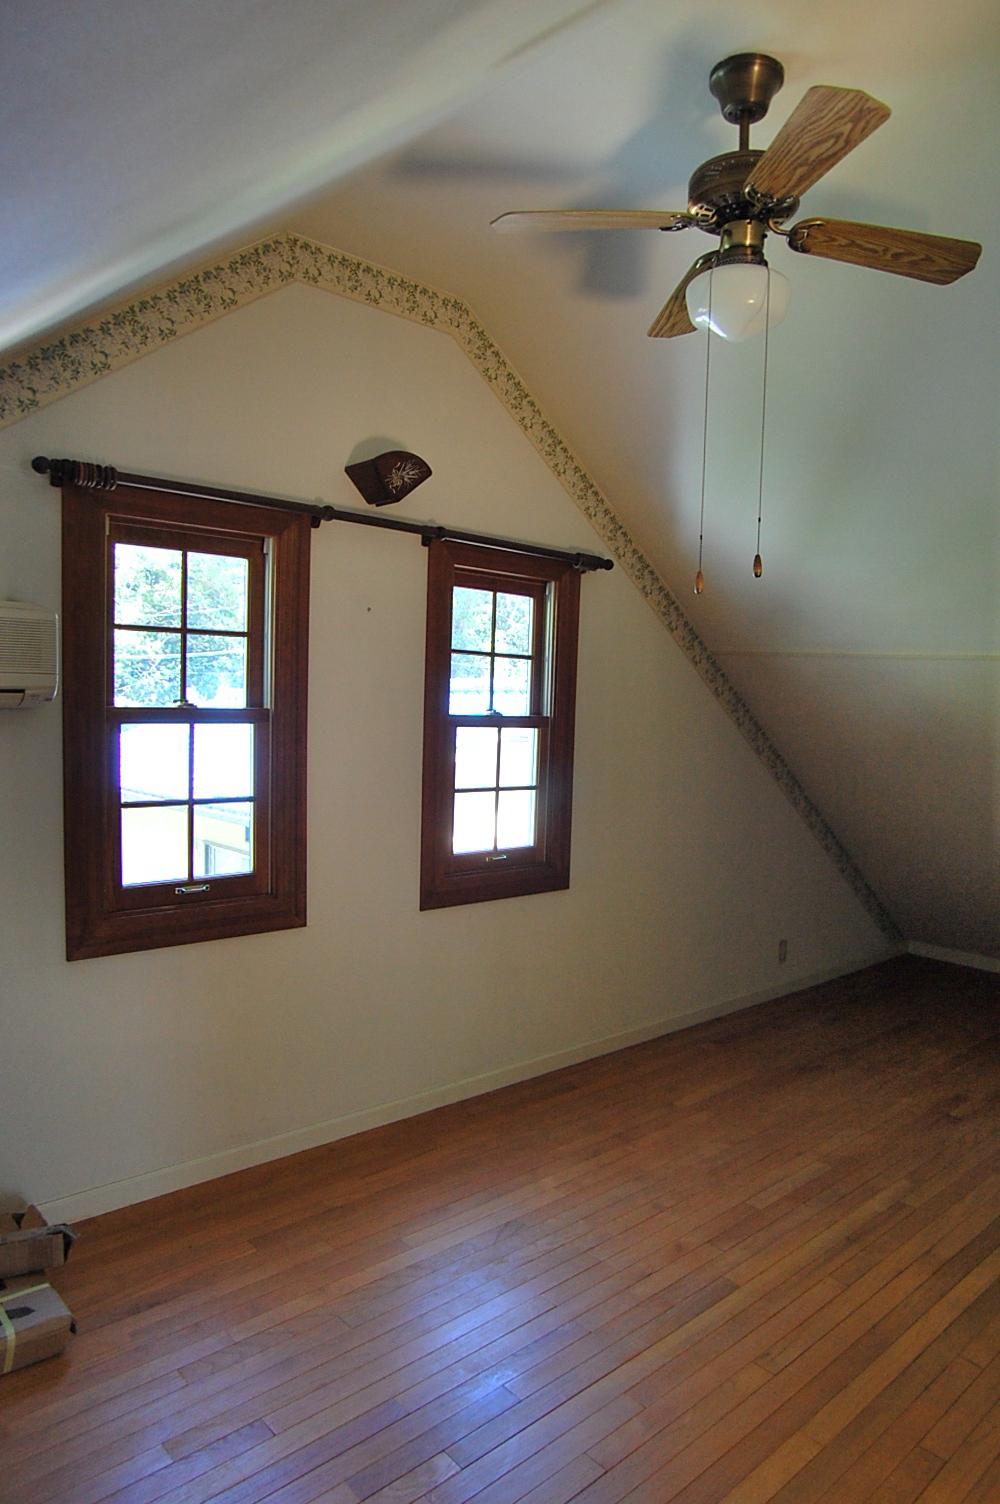 Other introspection. Attic-style bedroom